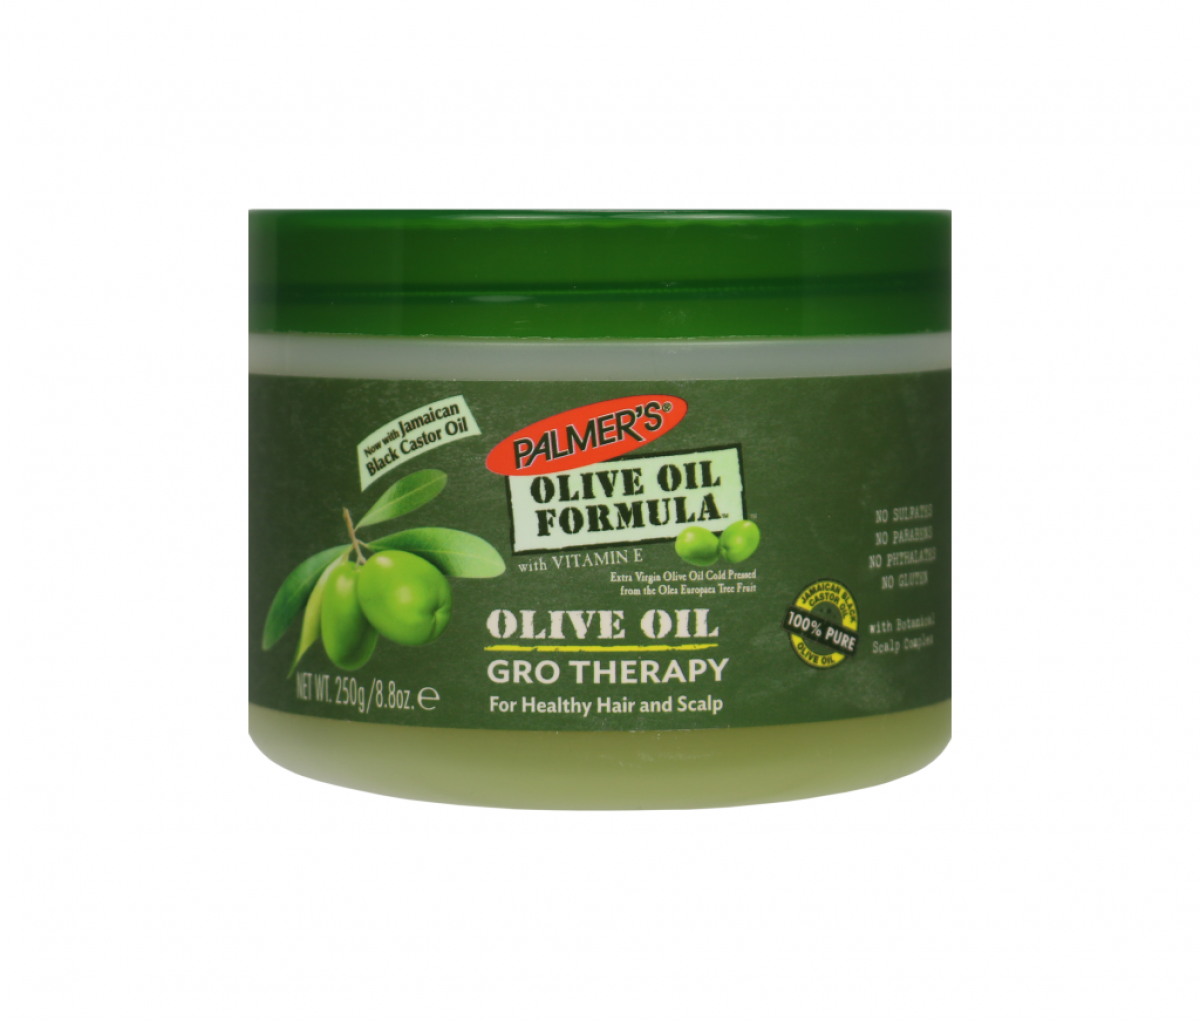 Palmers olive oil formula go therapy 